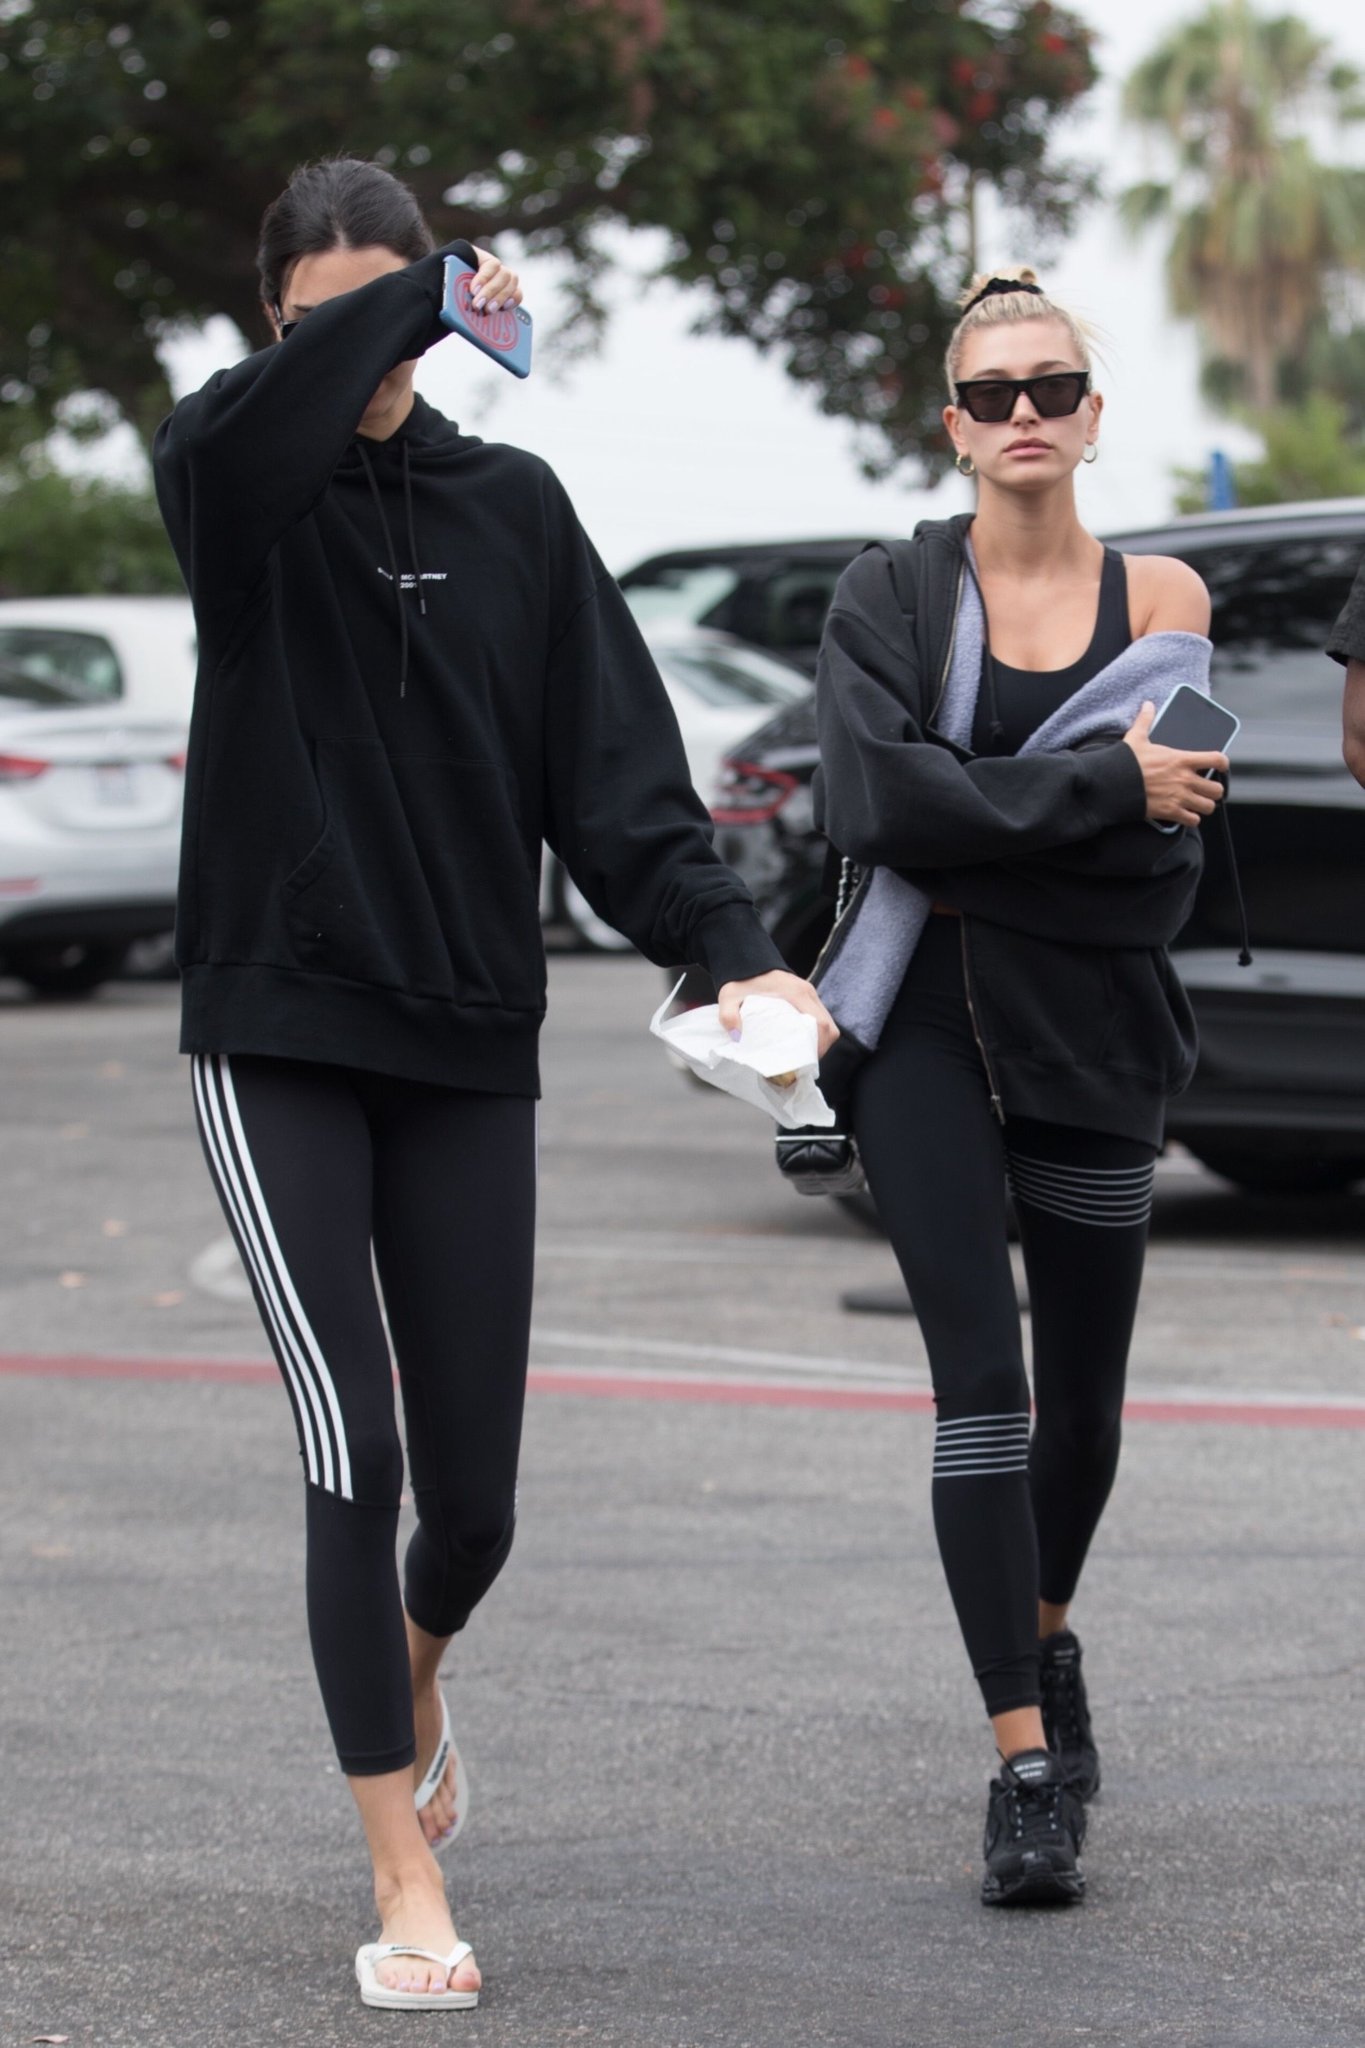 Hailey Baldwin CR Media on X: Hailey Bieber and Kendall Jenner arriving at  Hot Pilates in West Hollywood, CA. (August 19, 2019)   / X